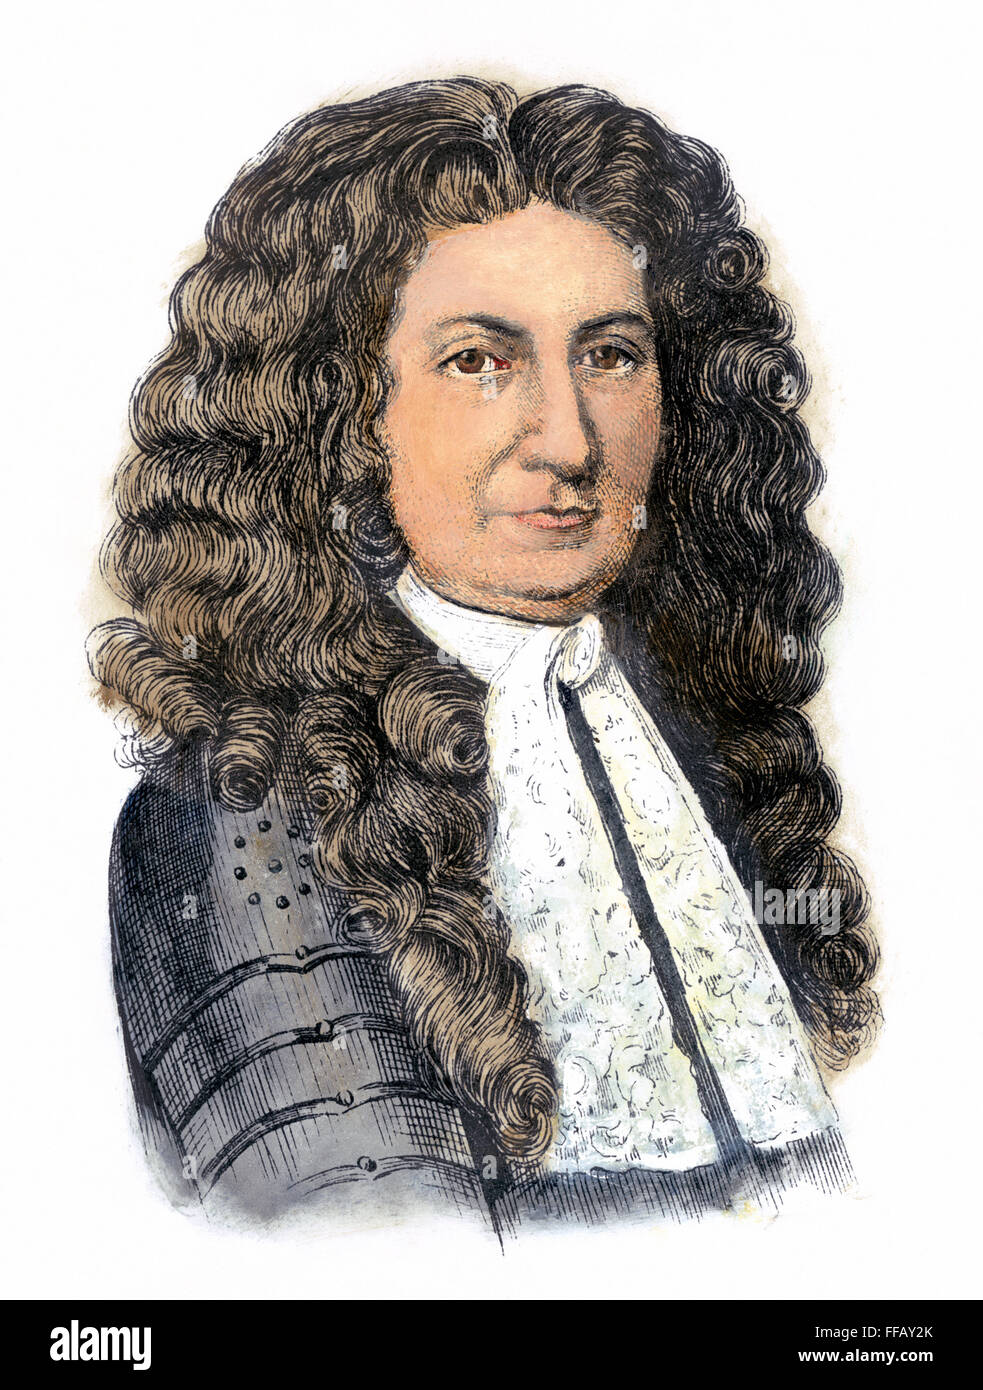 EDMUND ANDROS (1637-1714). /nBritish colonial governor in America. Colored etching, 19th century. Stock Photo